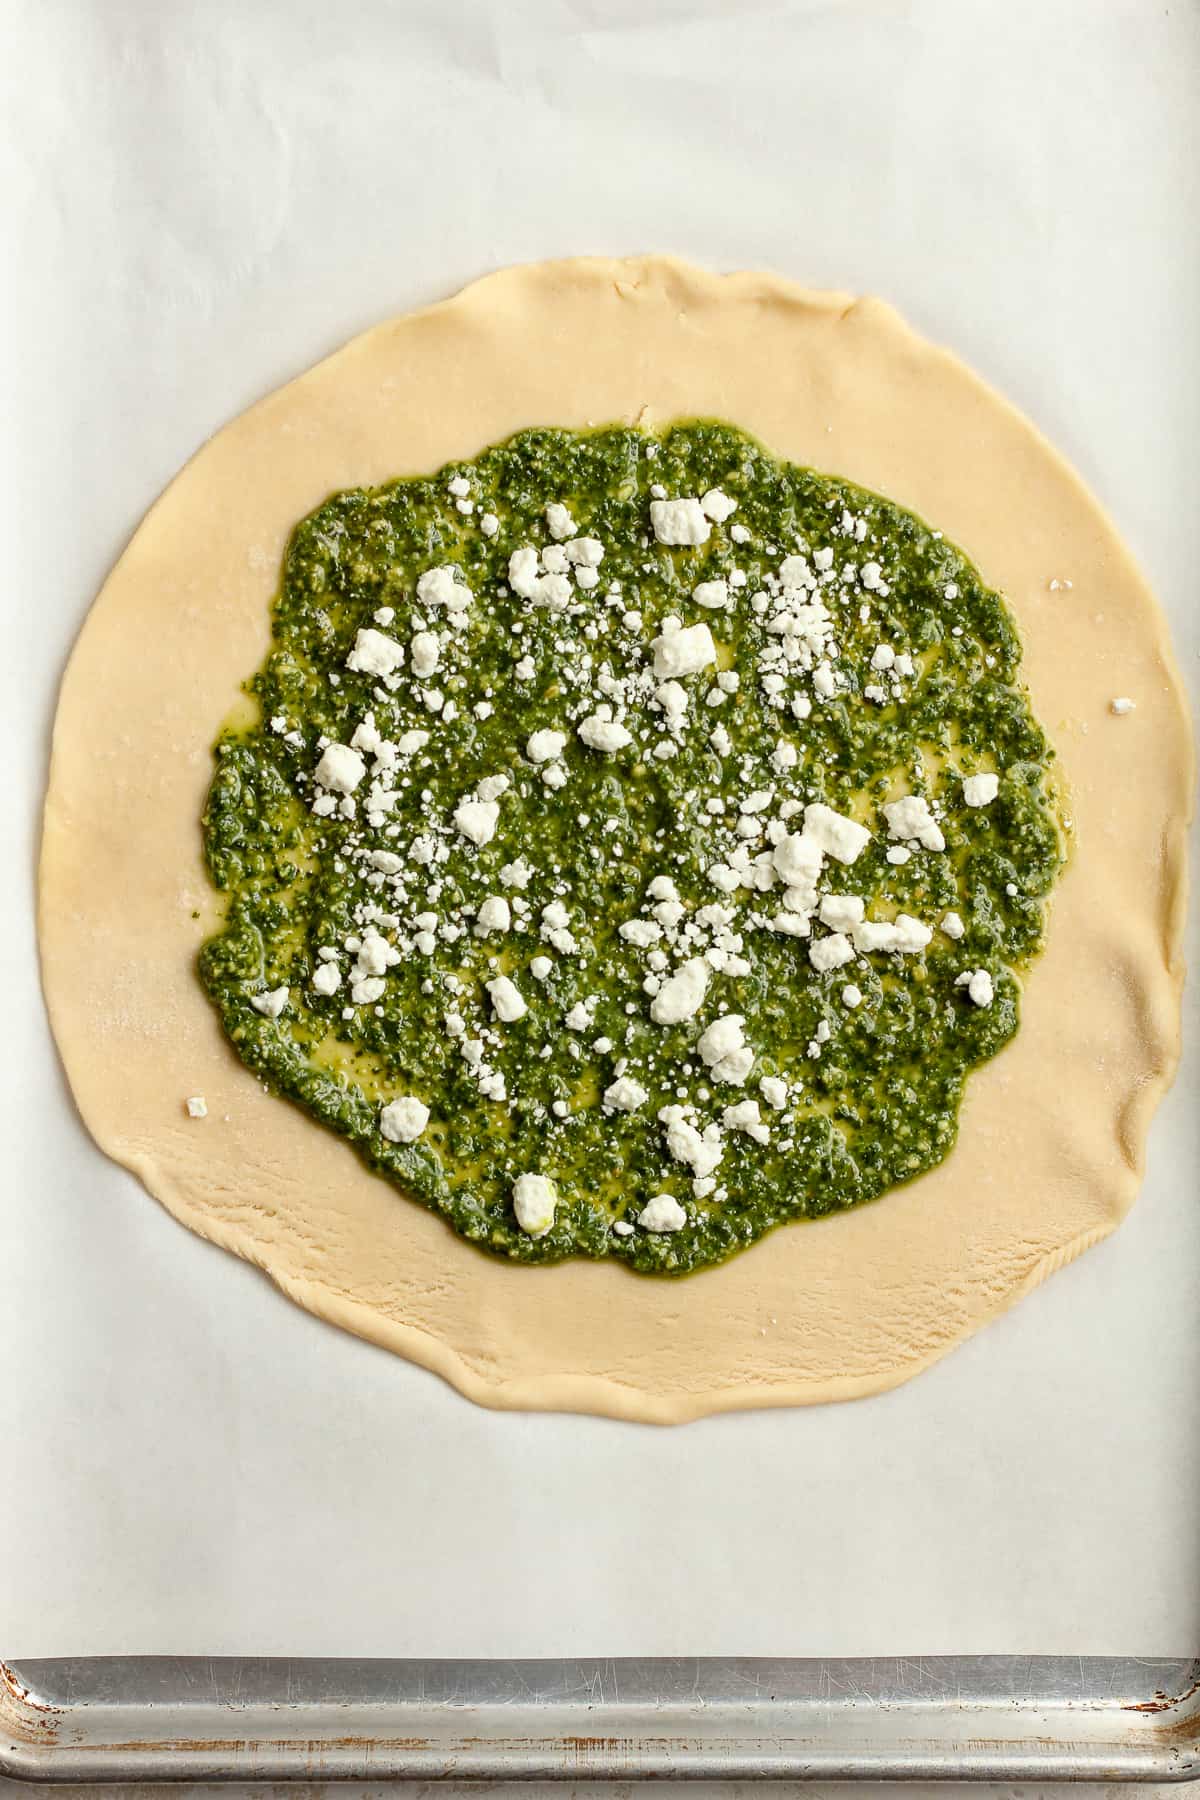 A round pie crust with pesto sauce and some goat cheese.